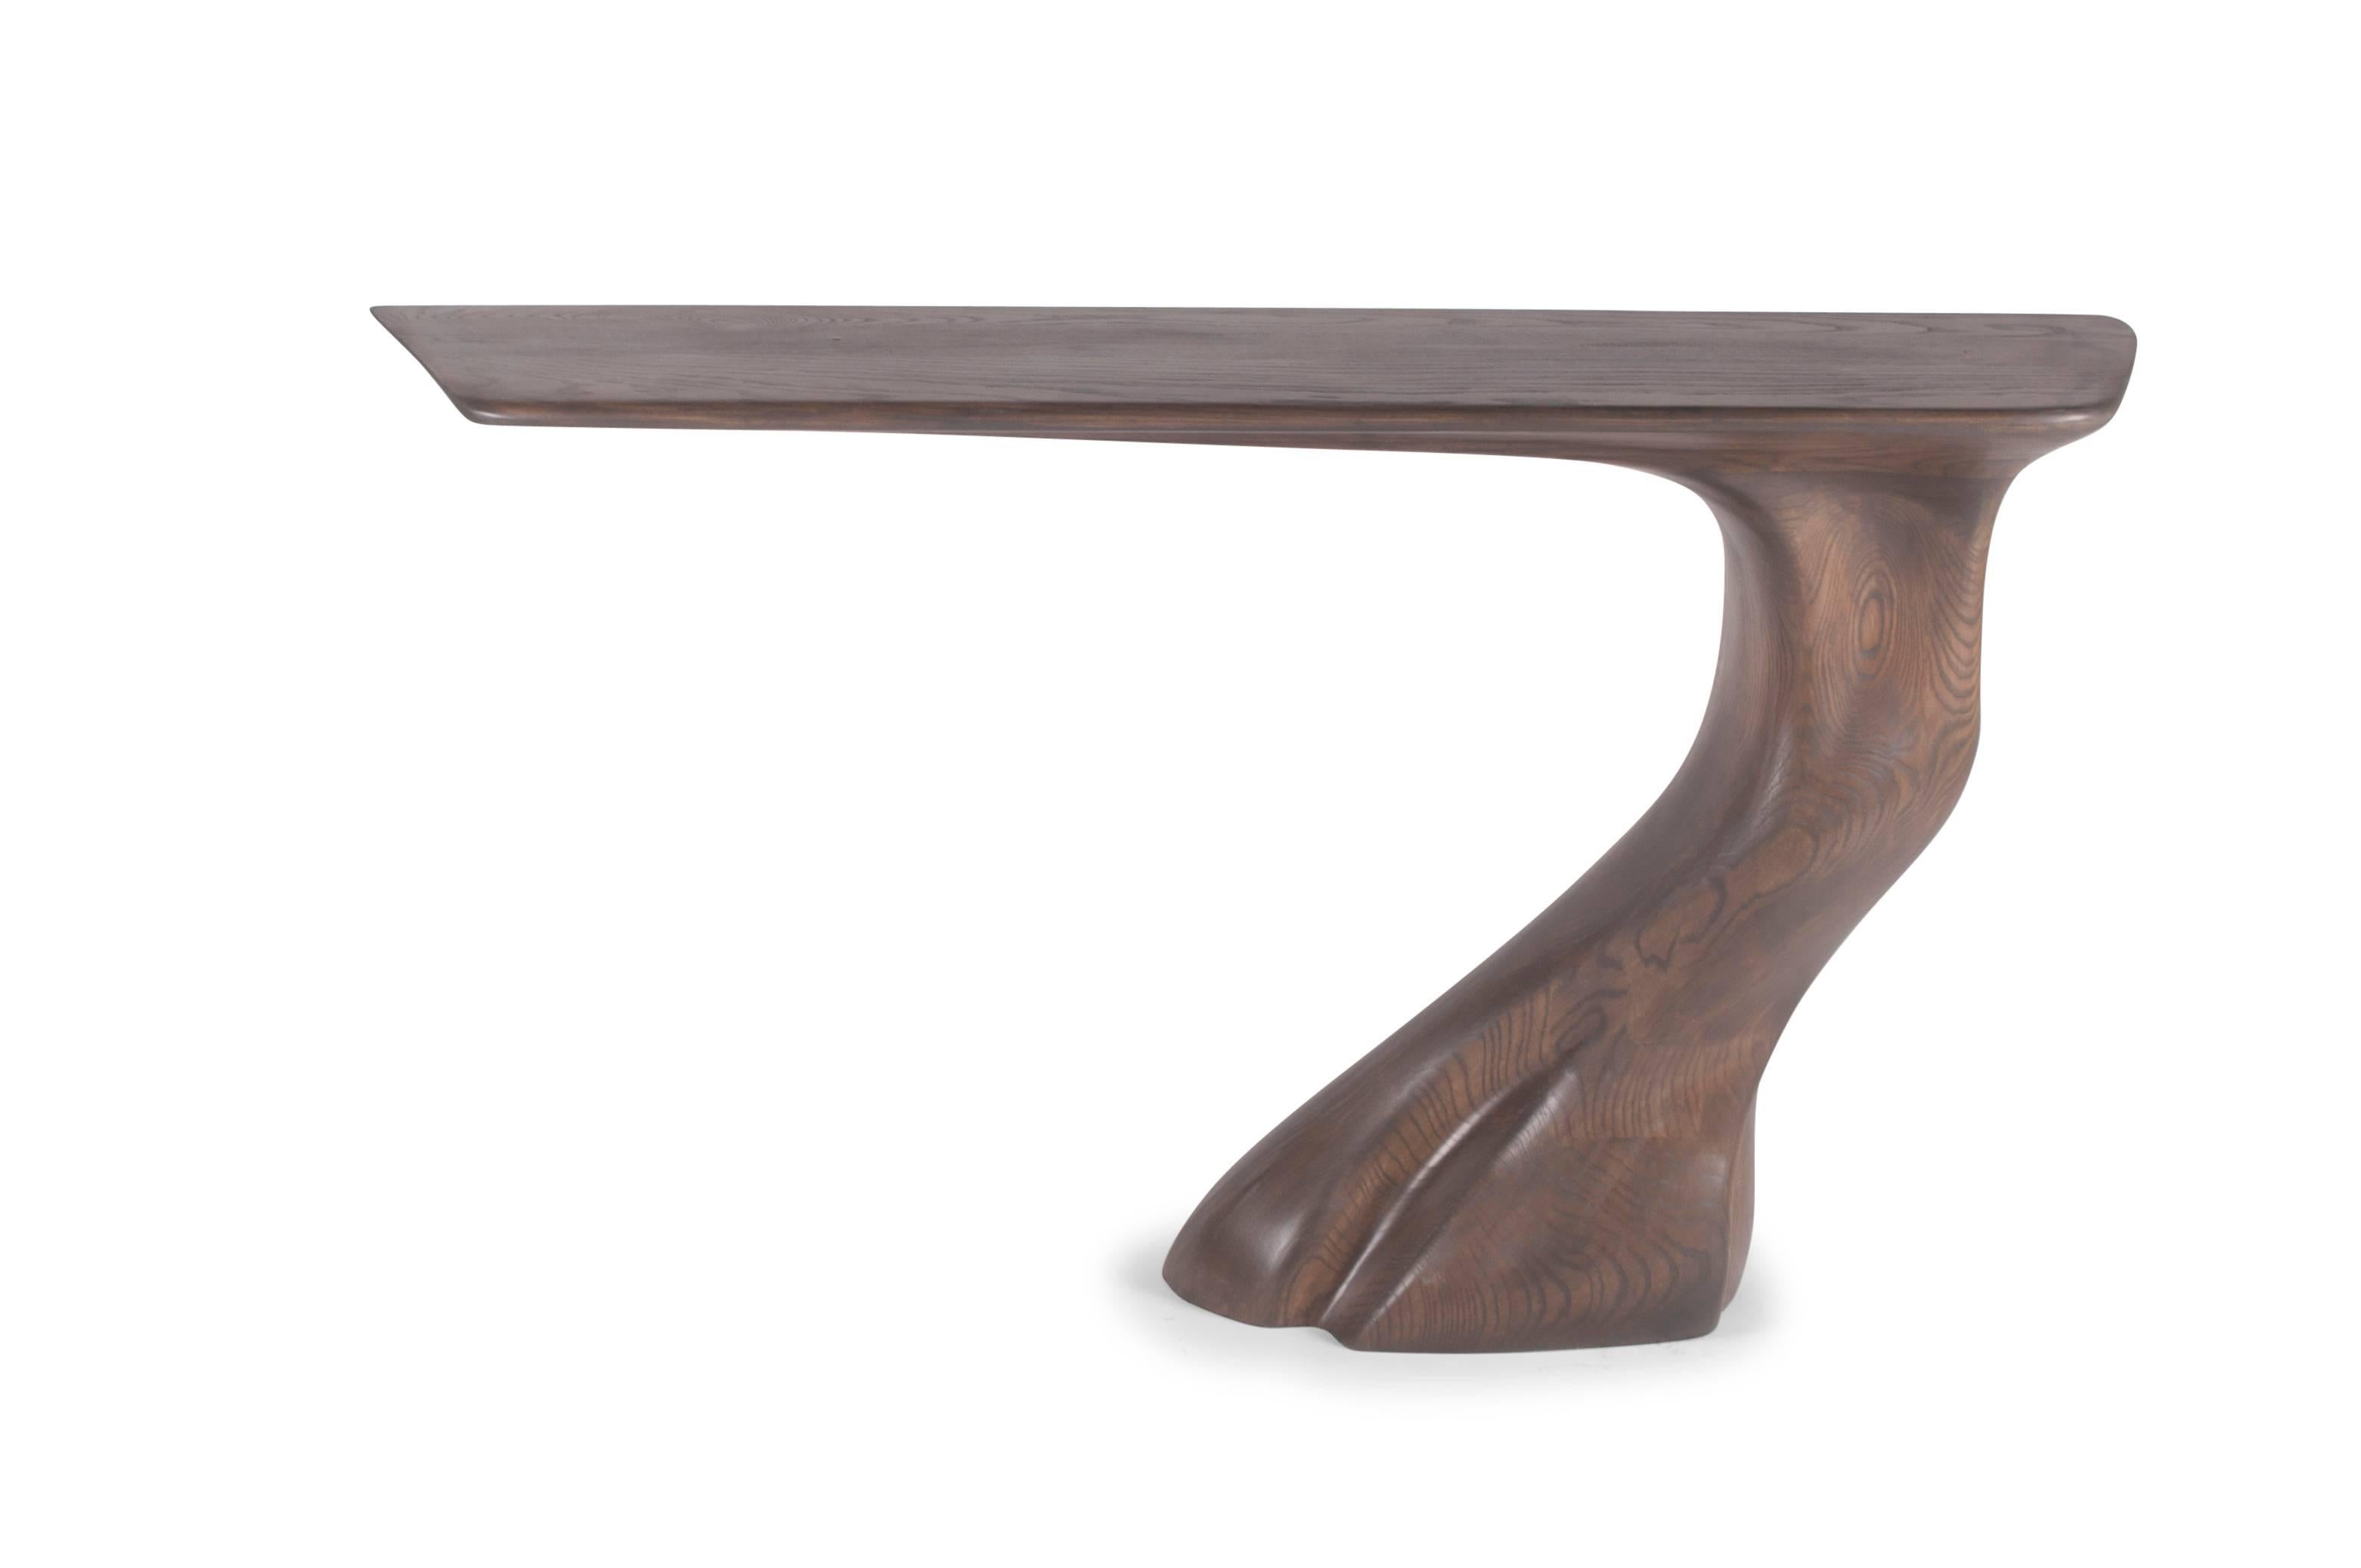 Frolic Console Table is wall mounted console, the concealed bracket is attached to the console. 

About Amorph: 
Amorph is a design and manufacturing company based in Los Angeles, California. We take pride in hand crafted designs connected to